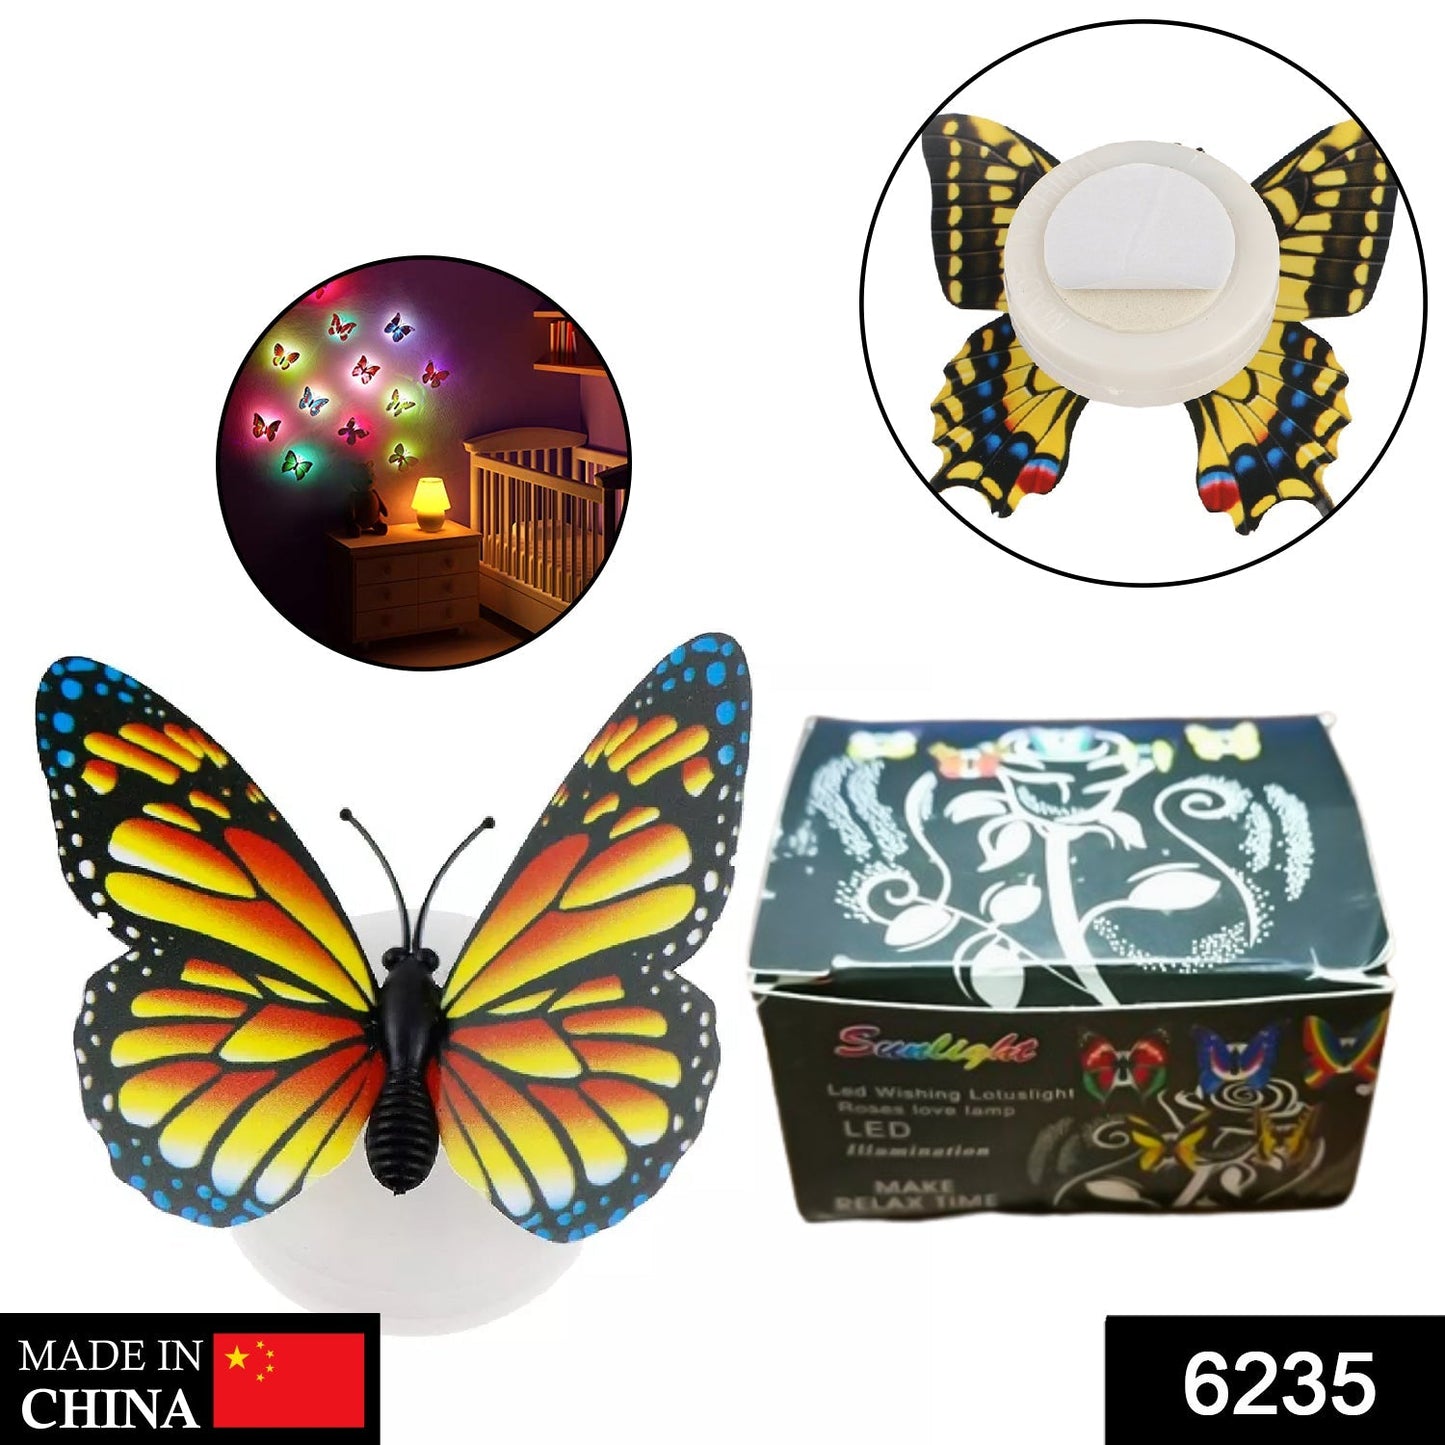 6235 The Butterfly 3D Night Lamp Comes with 3D Illusion Design Suitable for Drawing Room, Lobby.